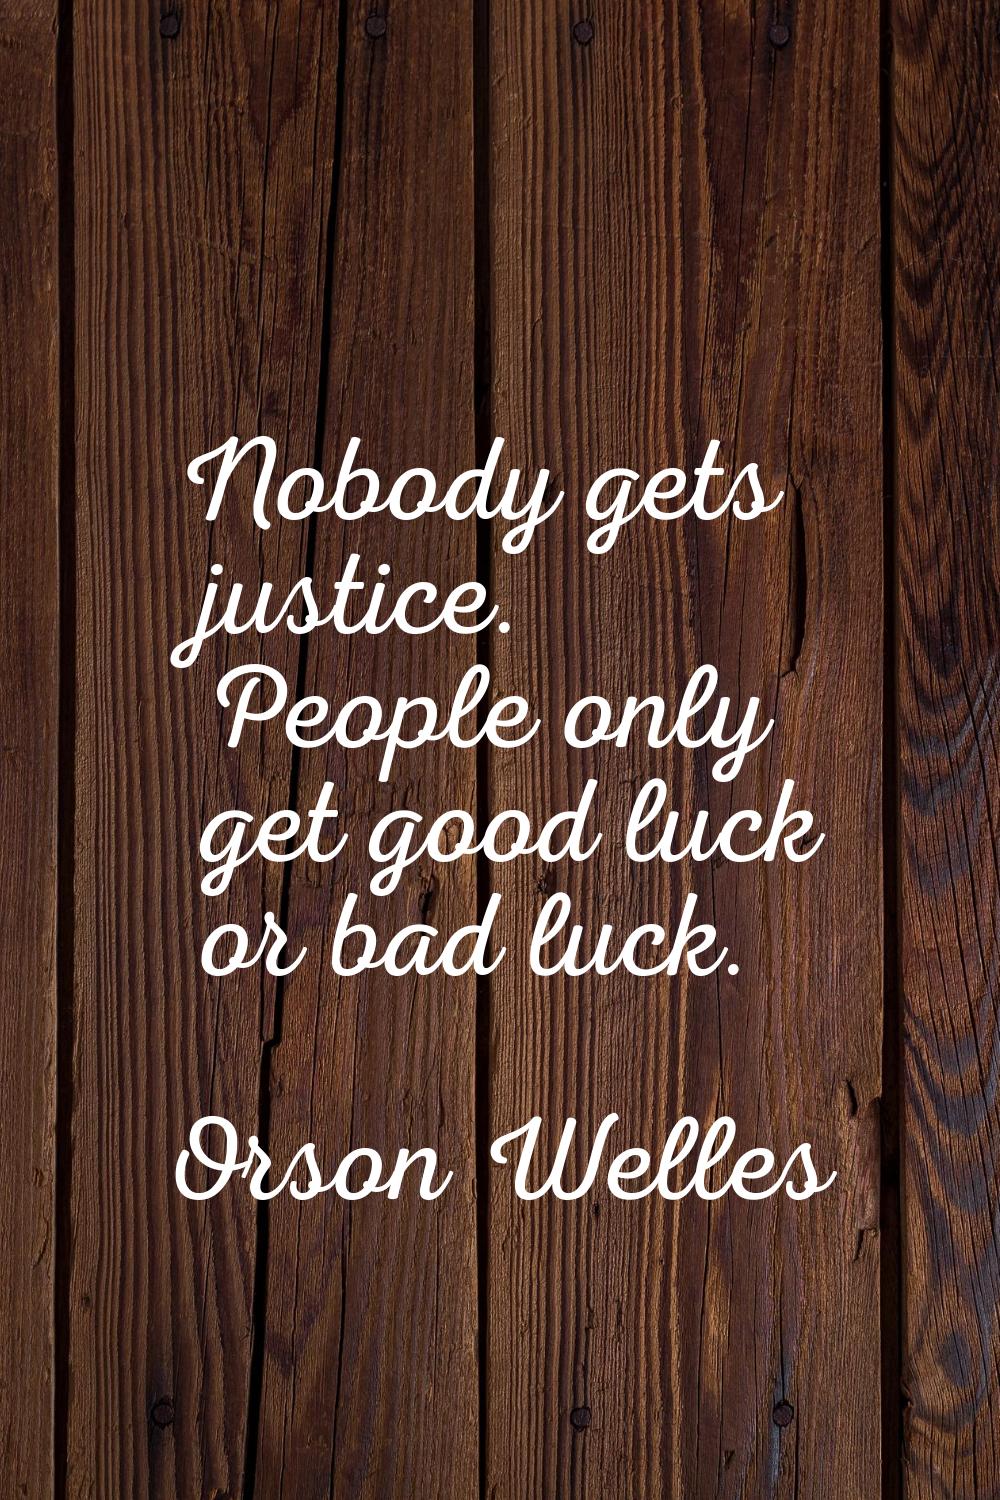 Nobody gets justice. People only get good luck or bad luck.